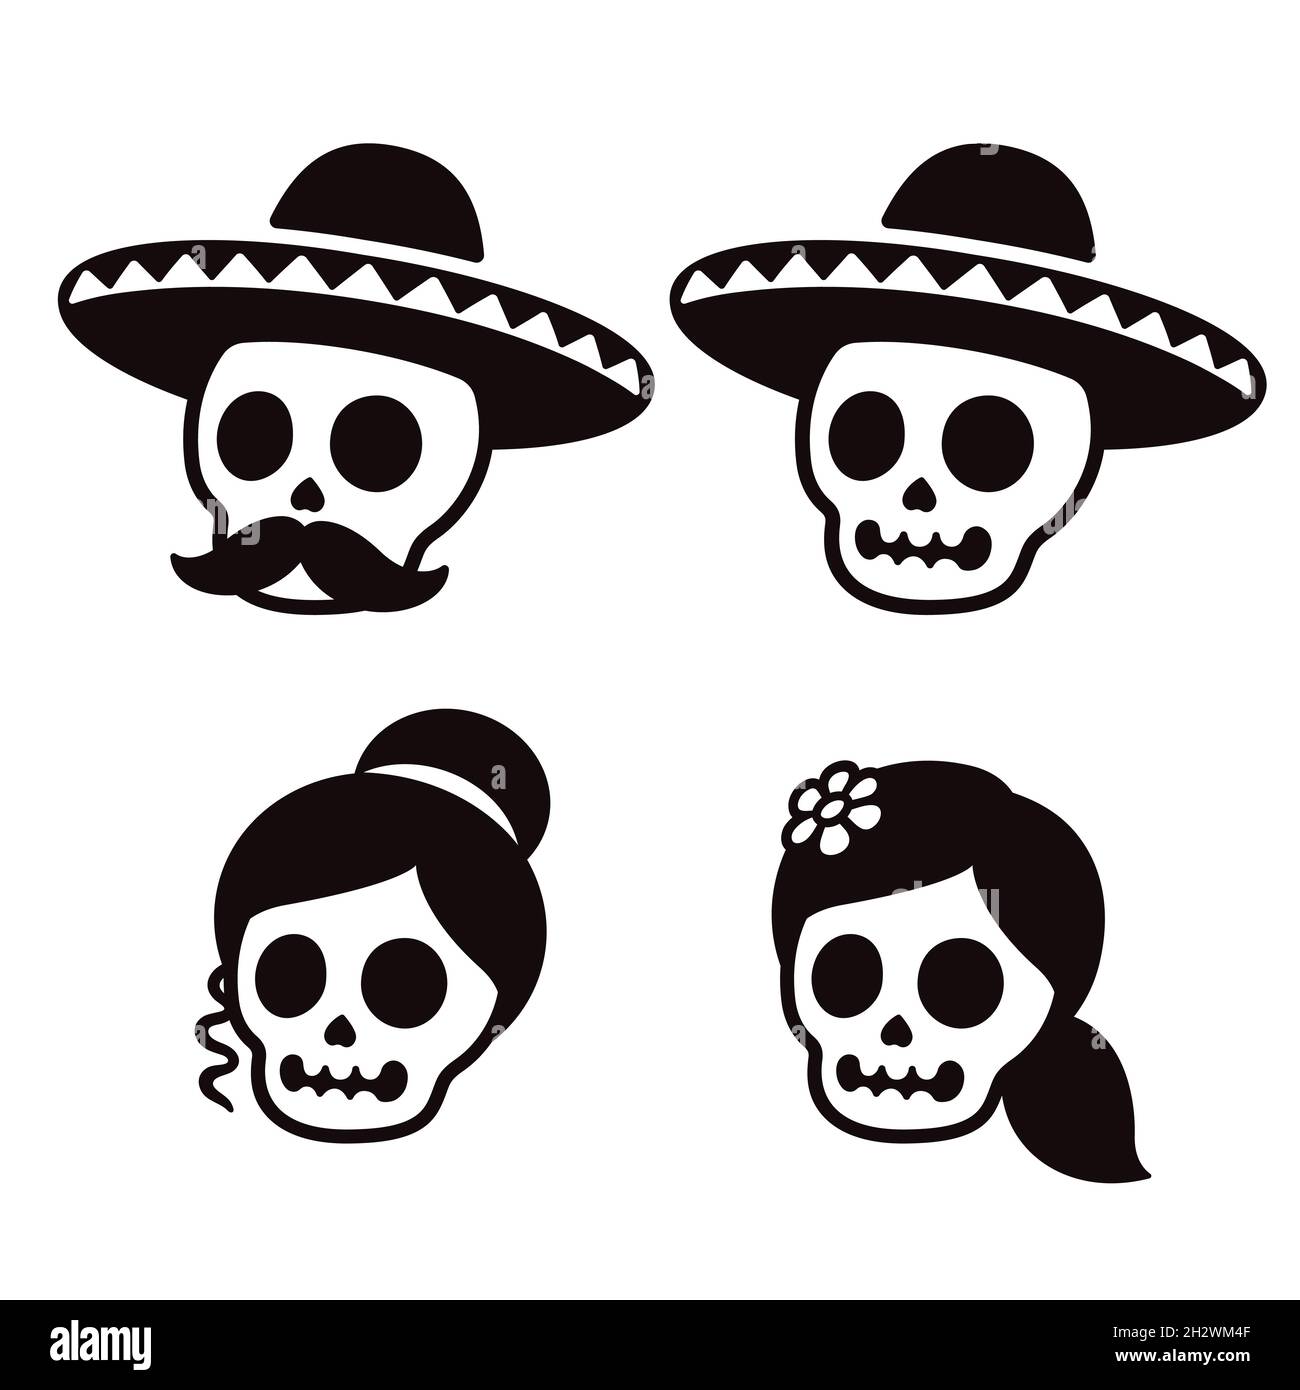 Cartoon Dia de los Muertos (Day of the Dead) Mexican skull family set. Male skulls in sombrero with mustache and female. Simple black and white vector Stock Vector